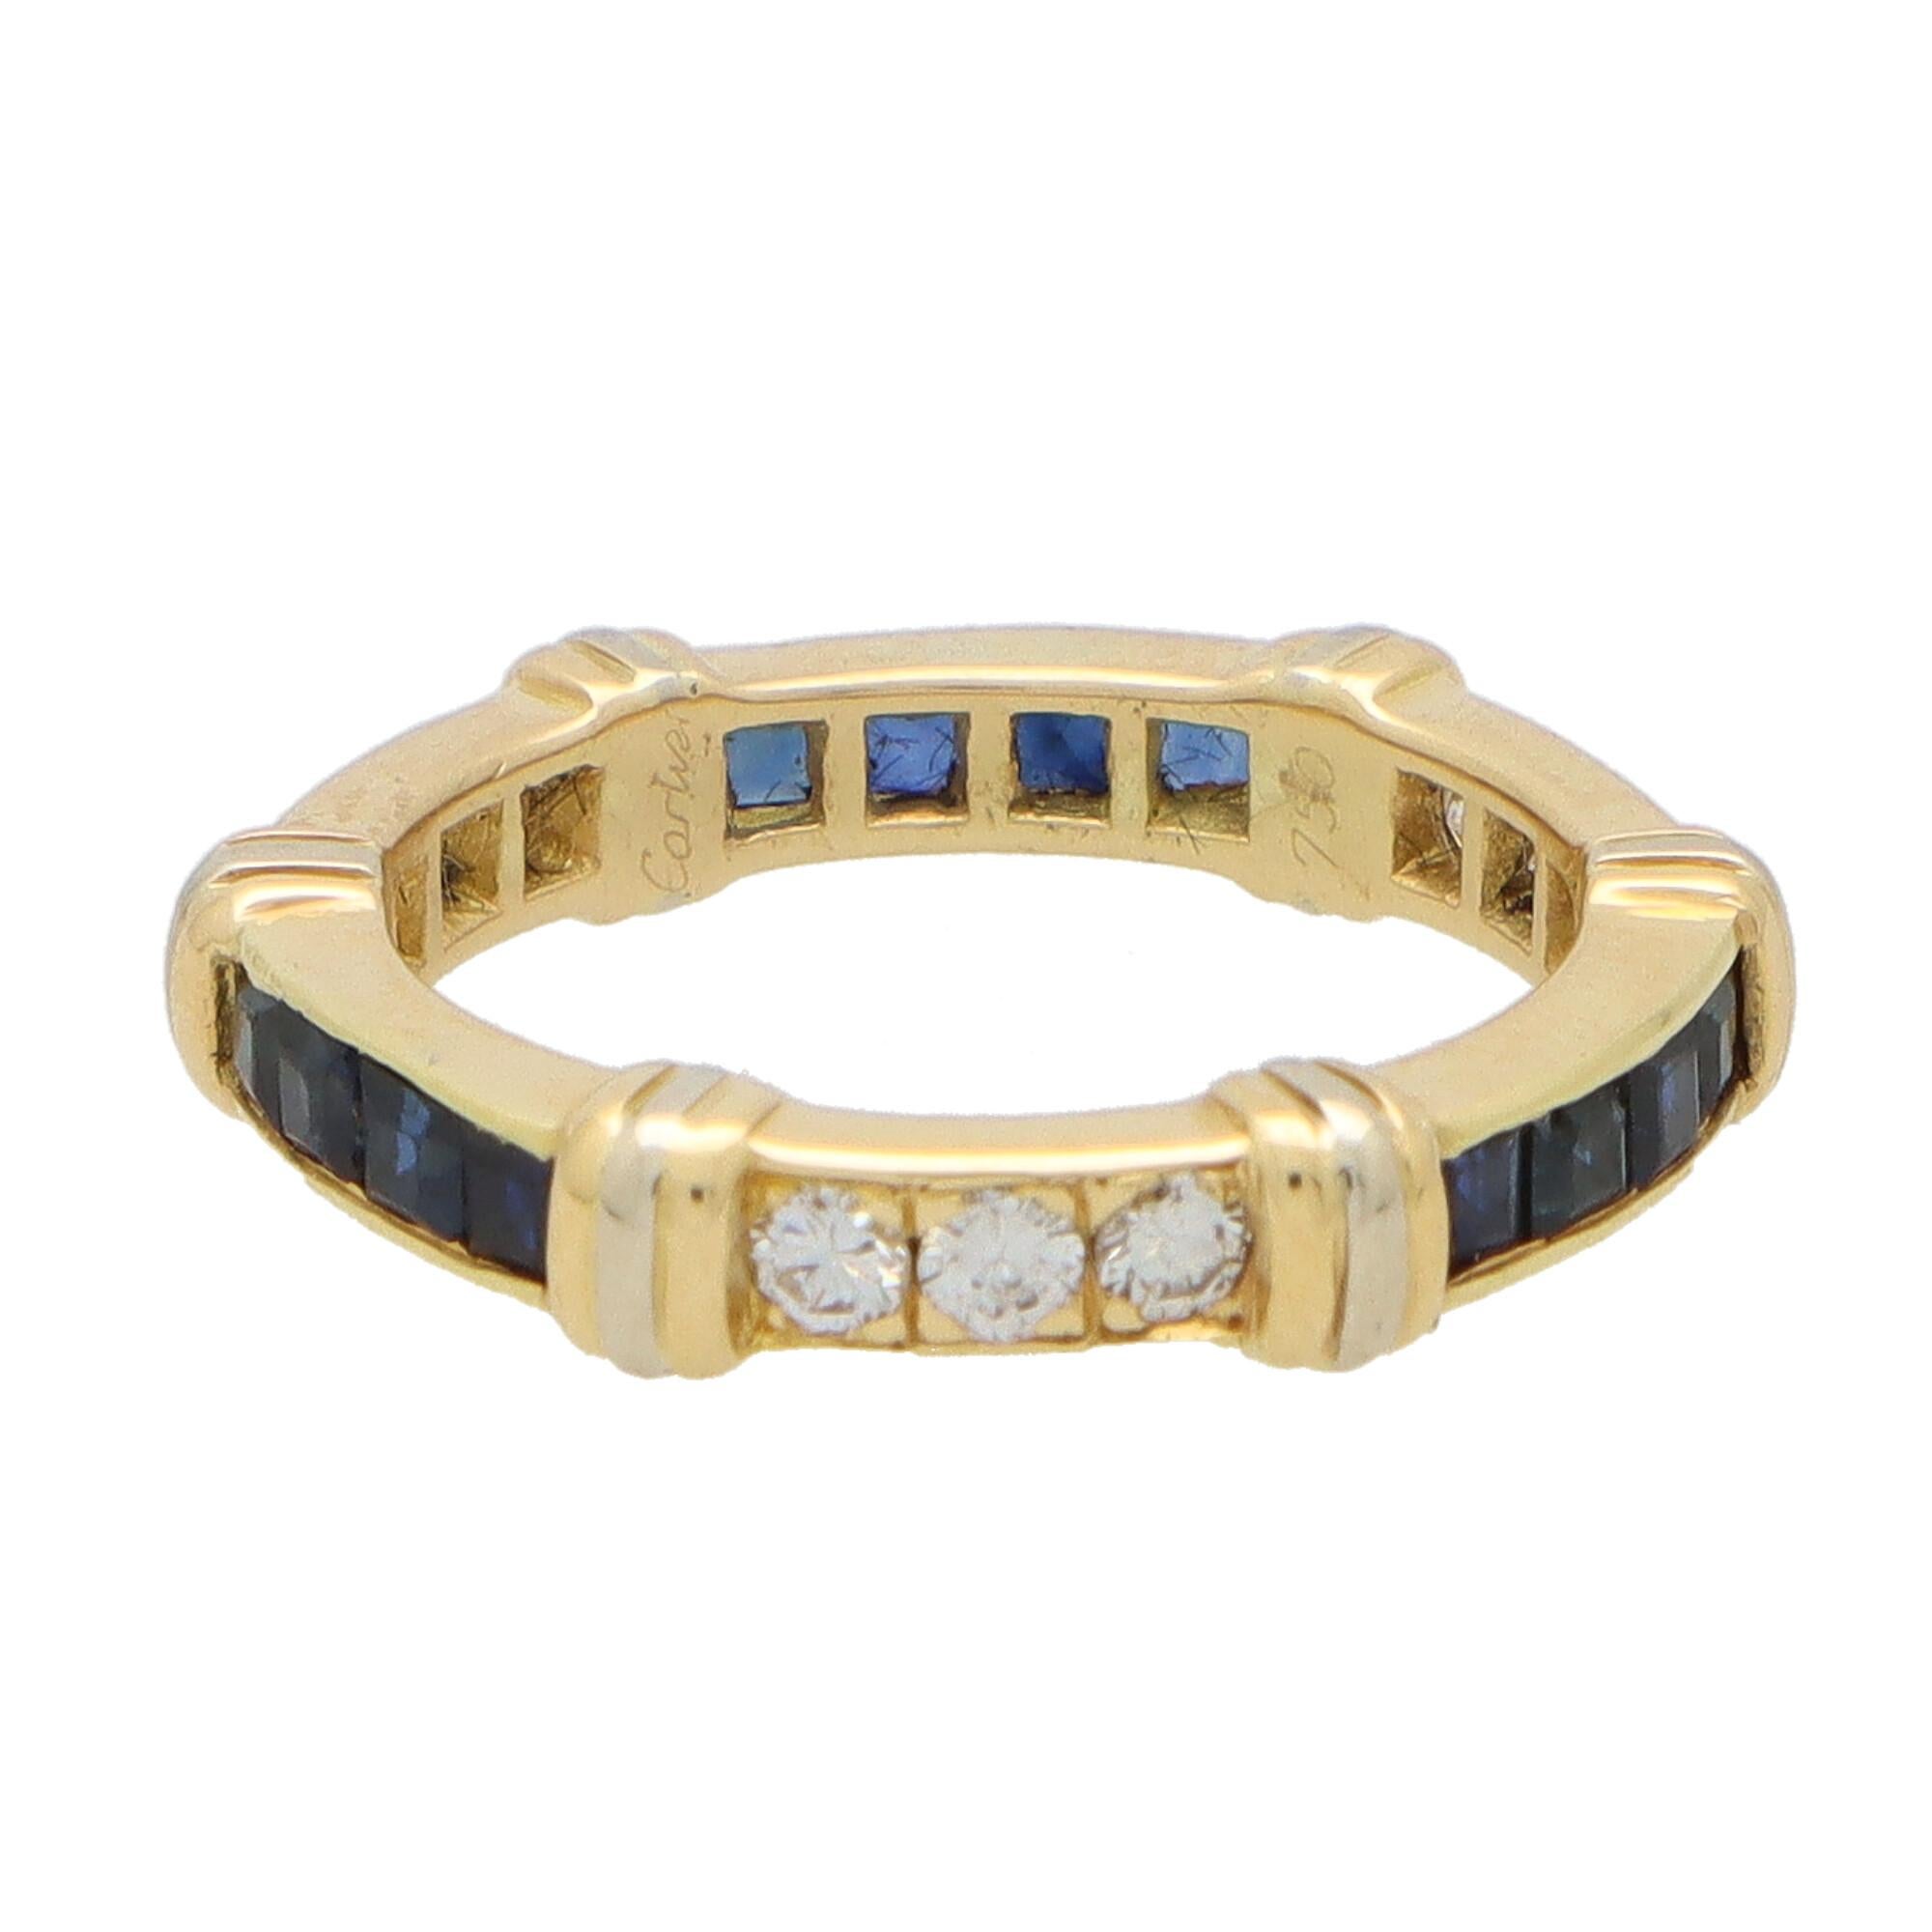 Retro Vintage Cartier Sapphire and Diamond Eternity Band Ring Set in 18k Yellow Gold